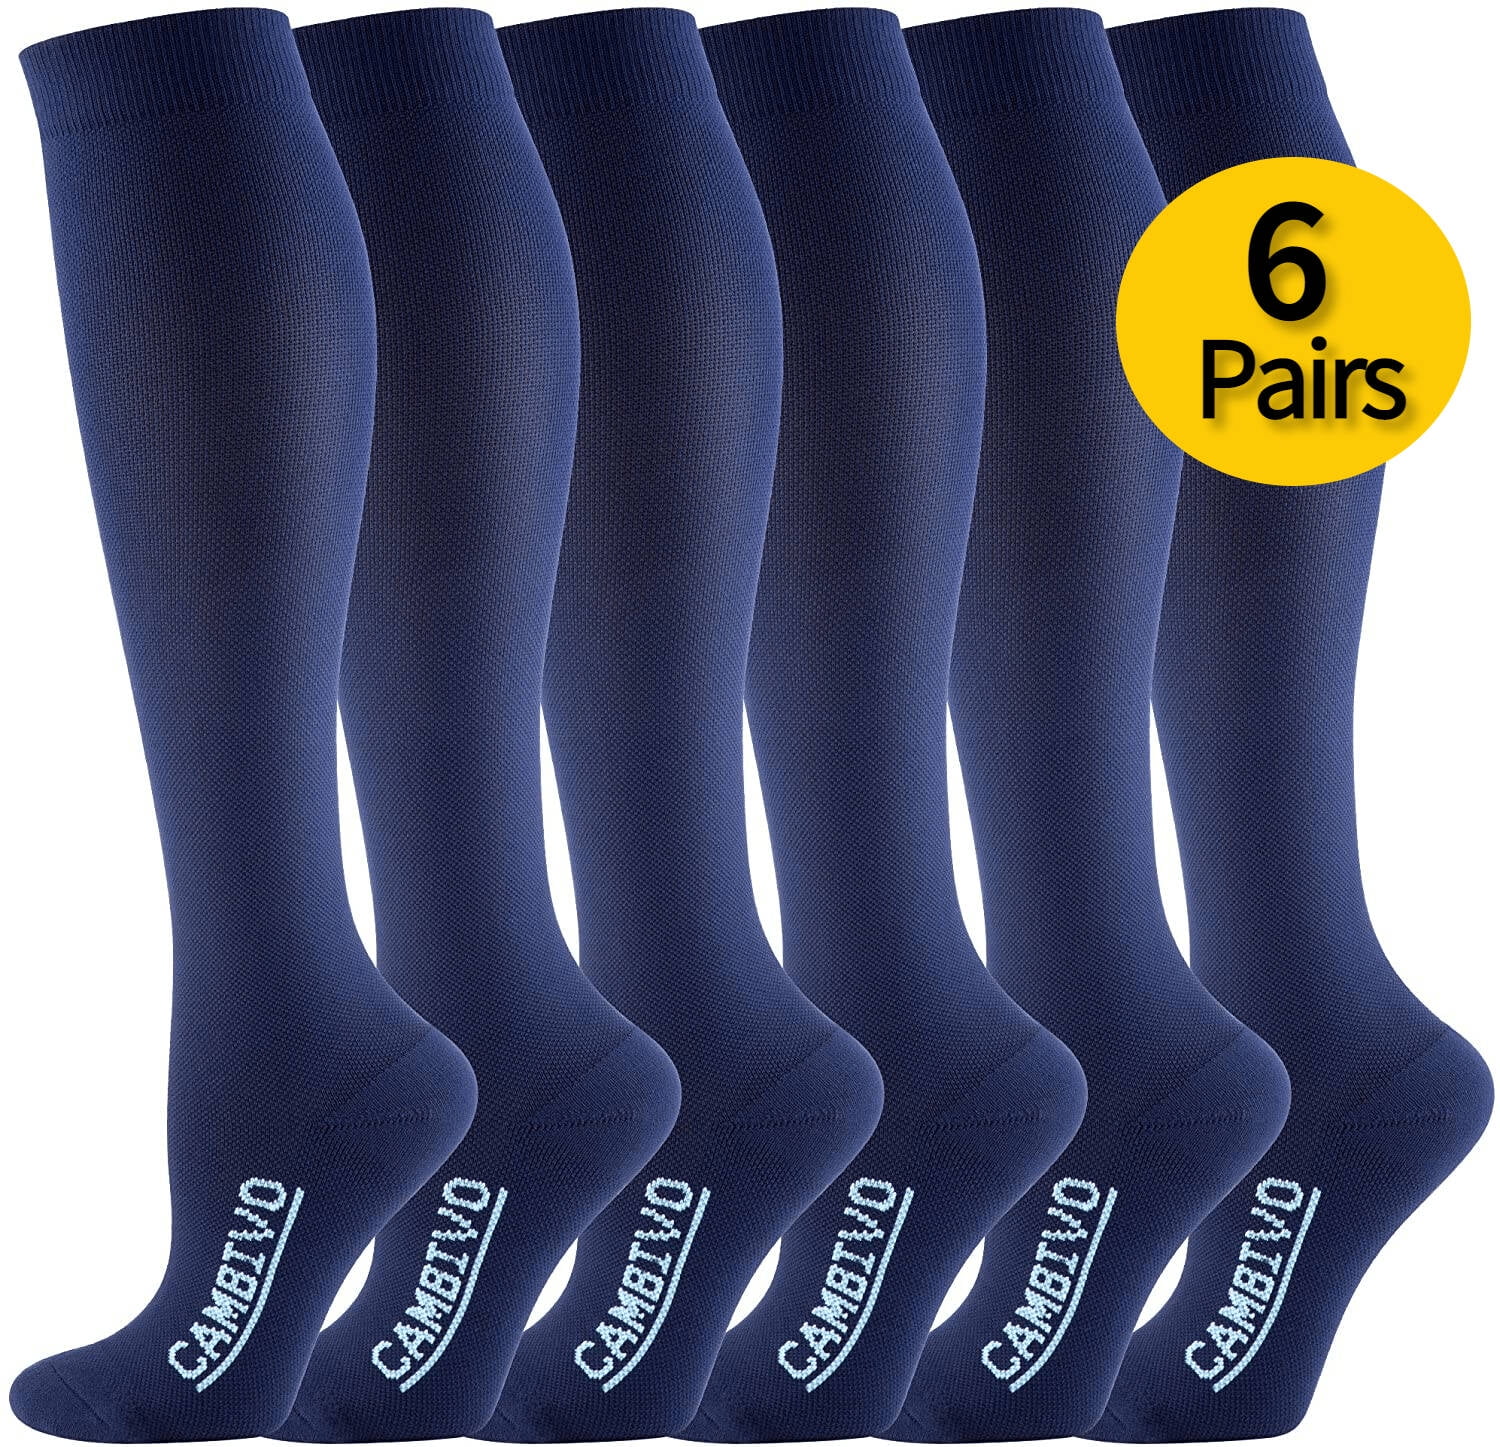 CAMBIVO Compression Socks for Women and Men, 6 Pairs Compression Stockings,  20-30mmHg Knee High Socks Best for Pregnancy, Running, Travel, Athletics,  Nurse, Flight, 